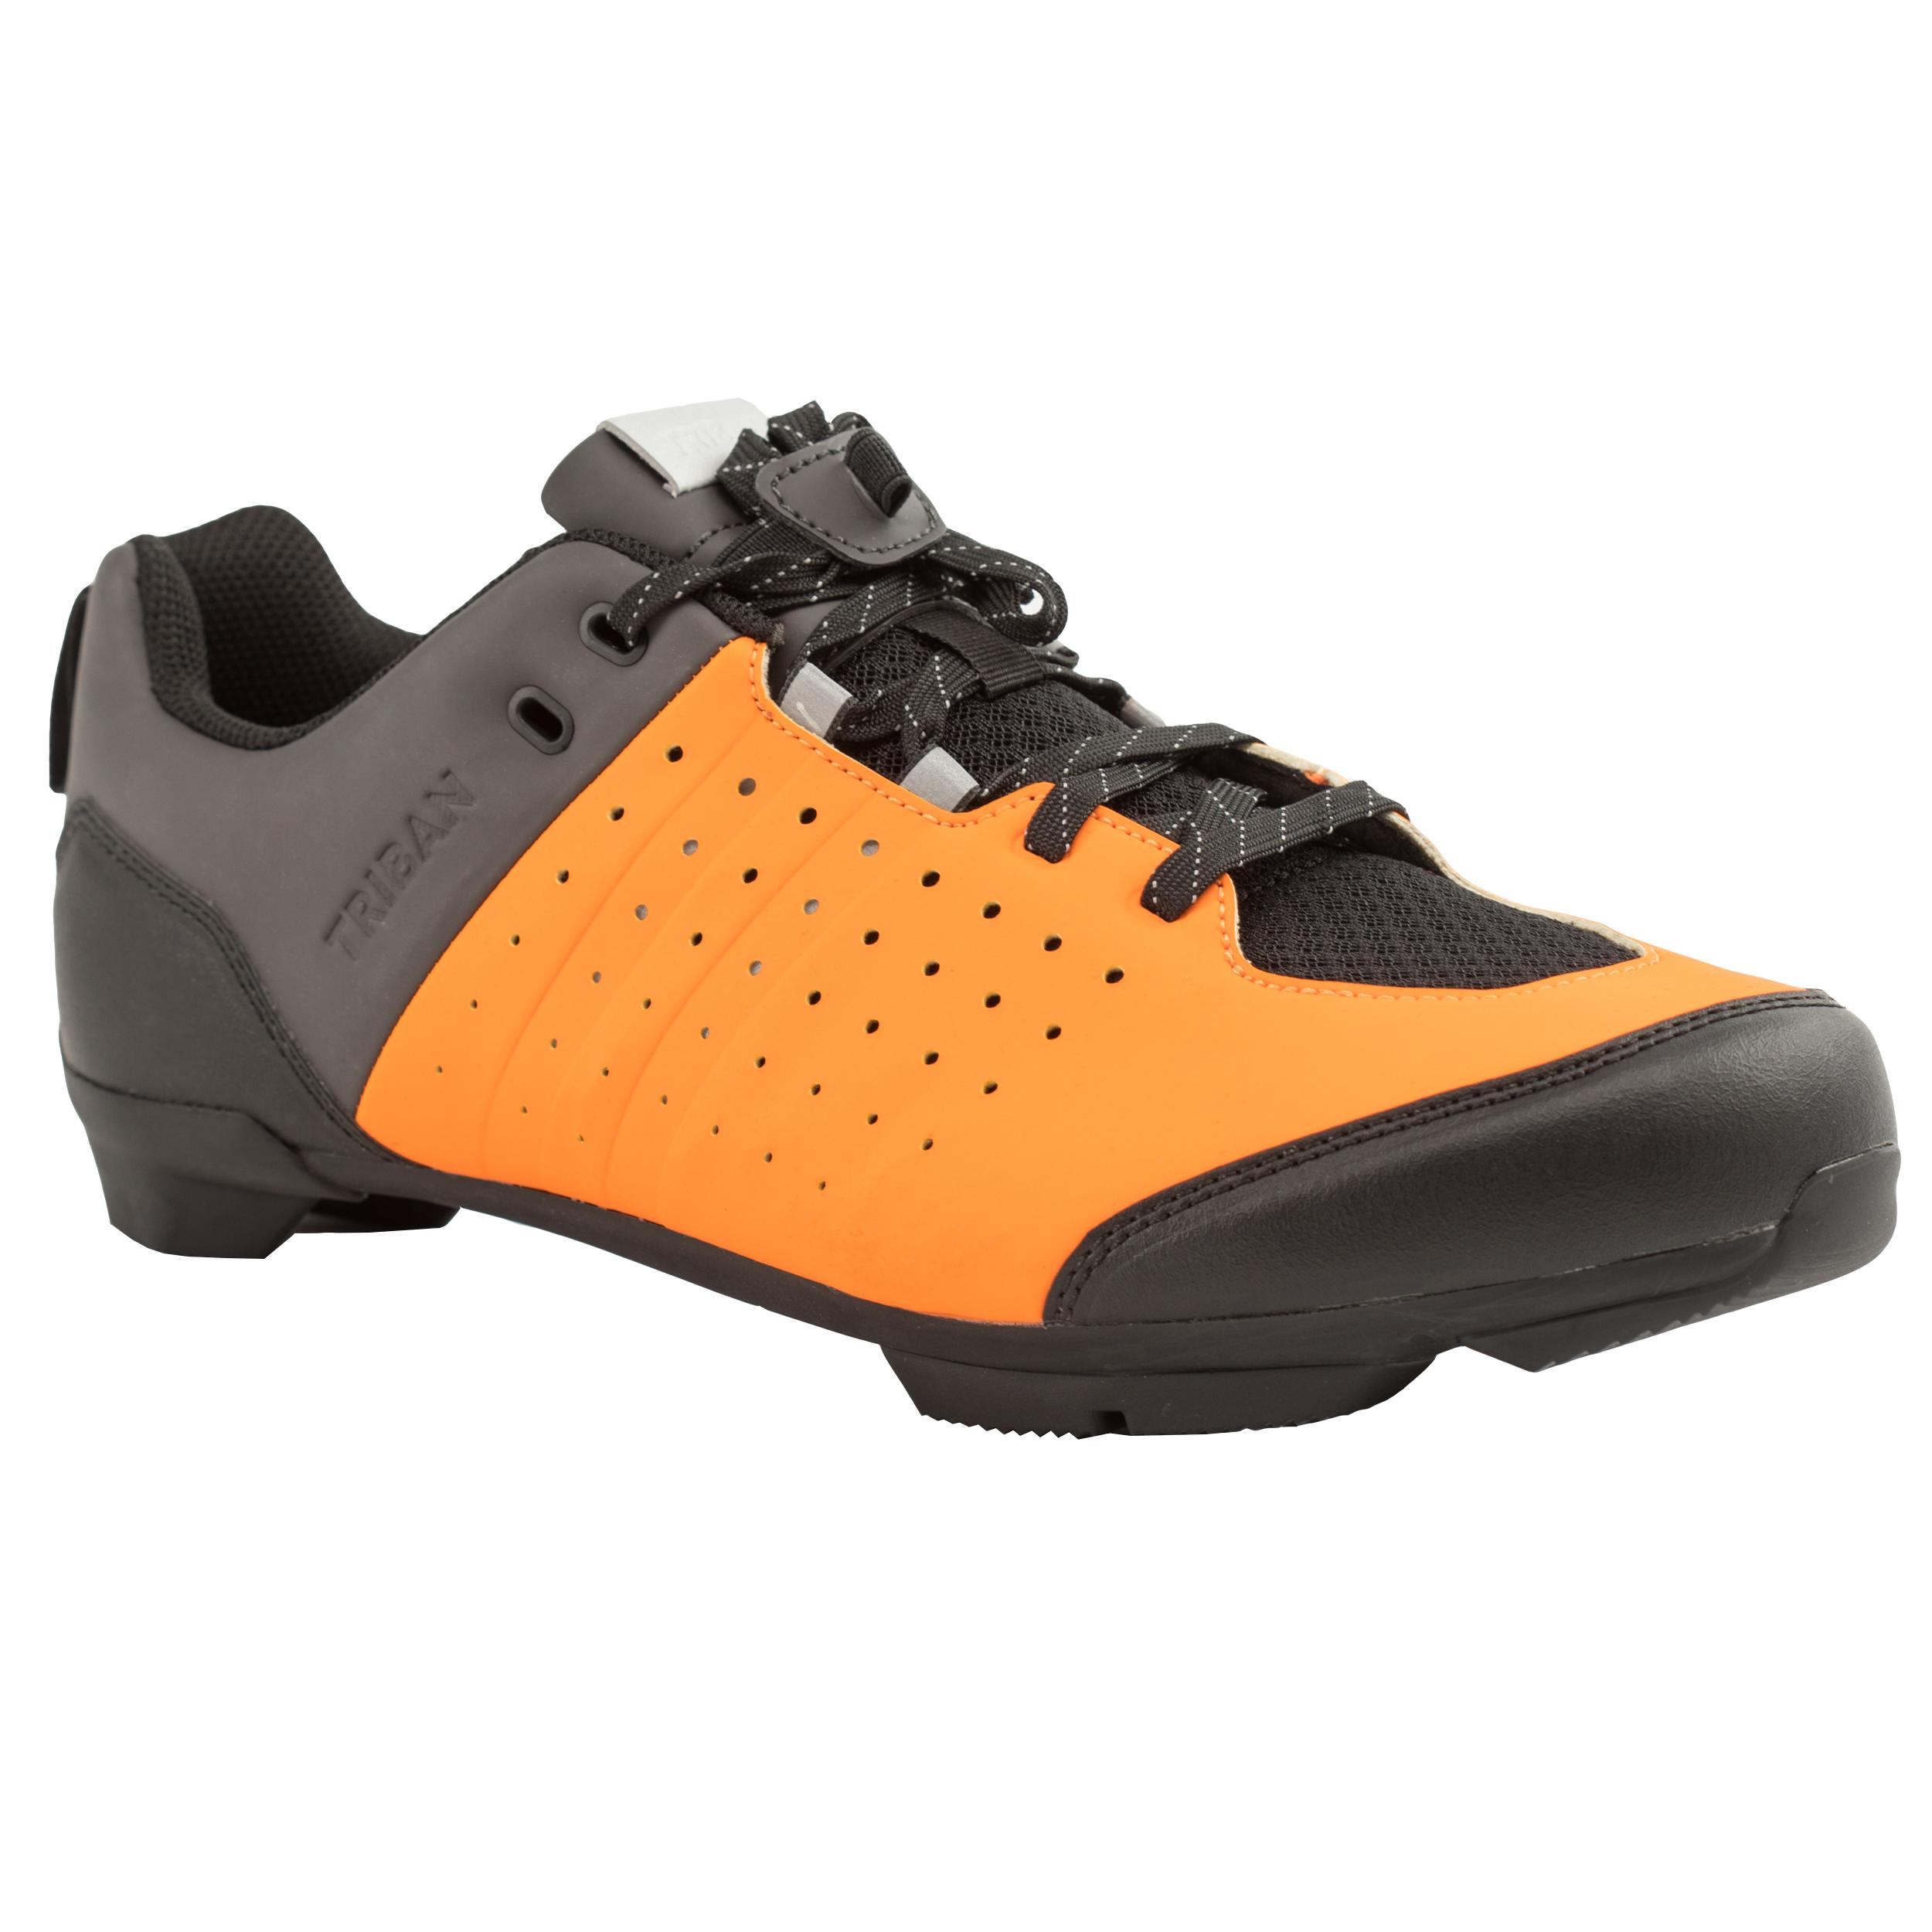 TRIBAN Road and Gravel Cycling Lace-Up SPD Shoes GRVL 500 - Orange / Grey